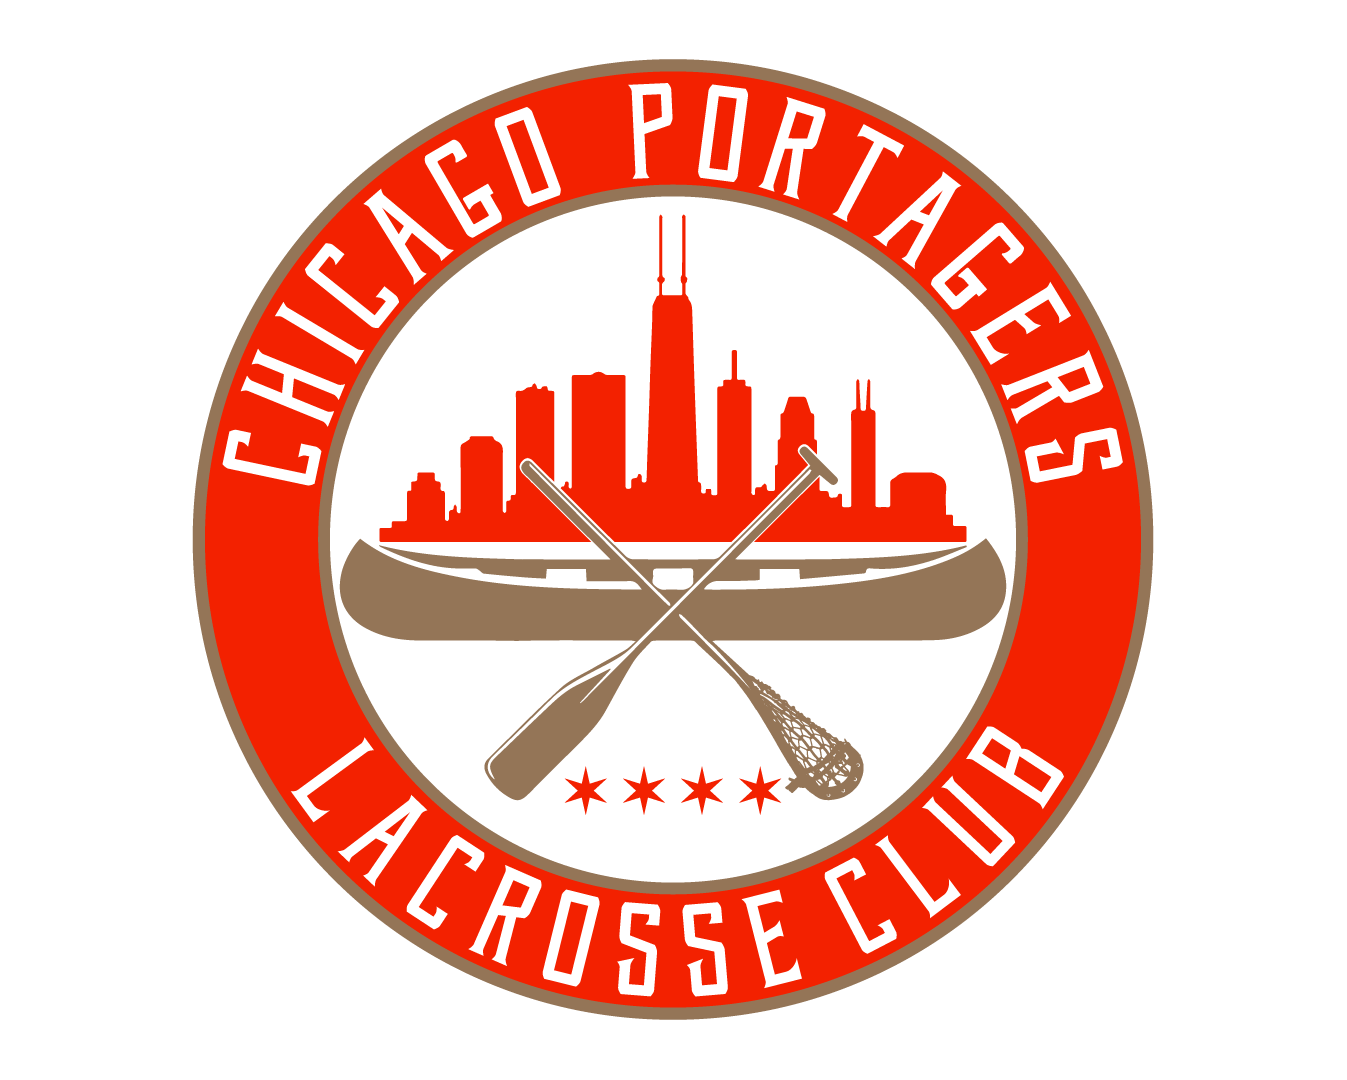 Chicago Portagers